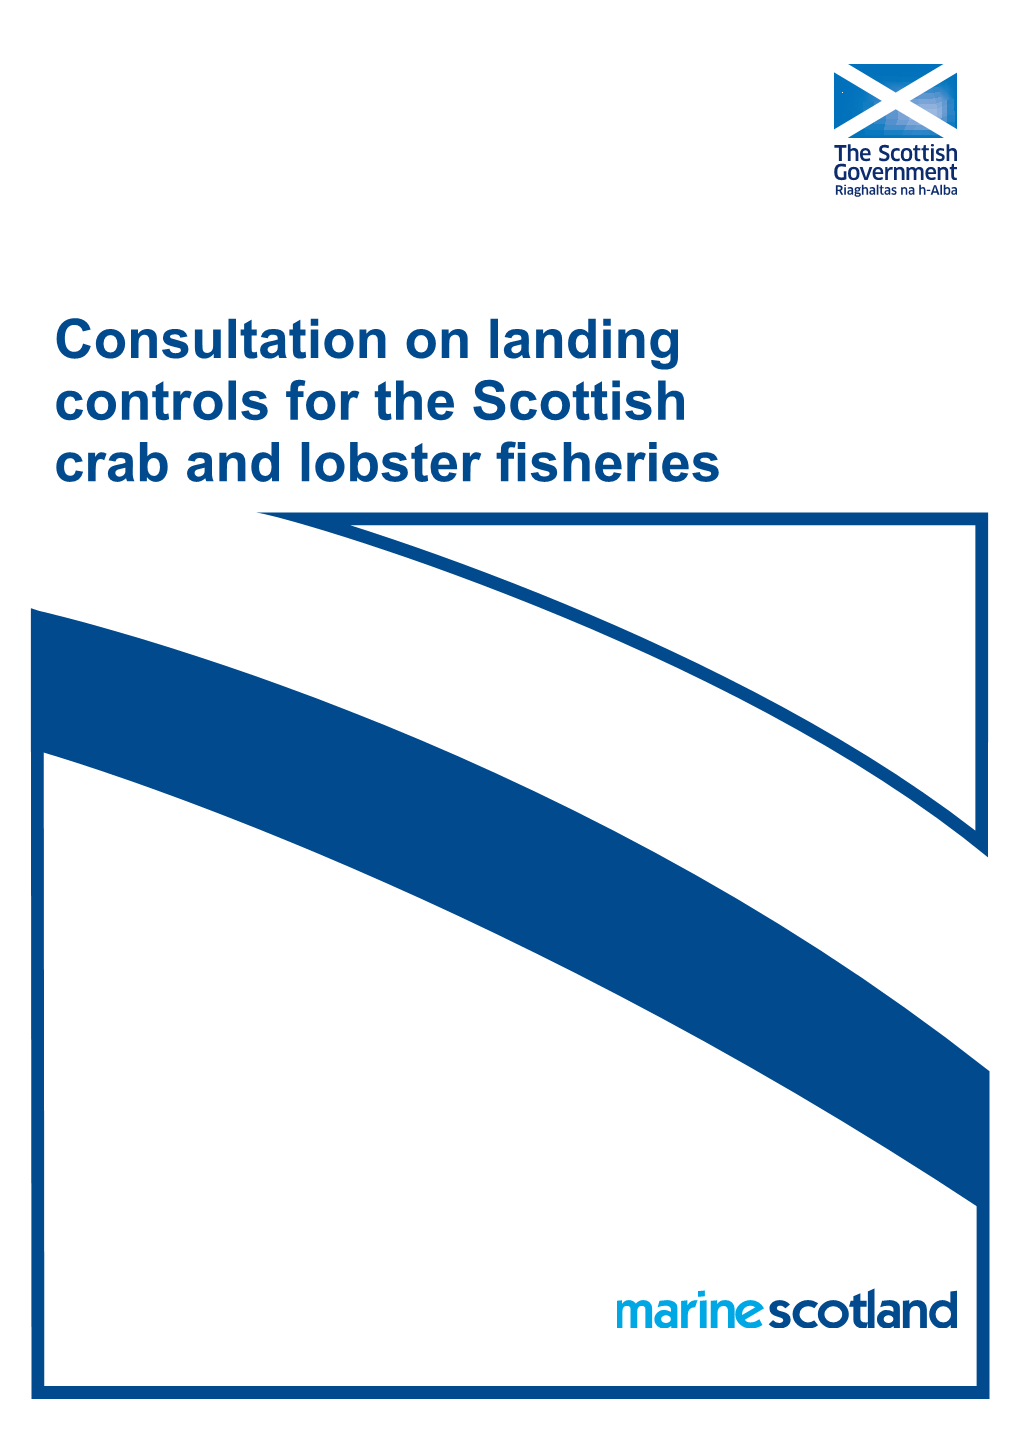 Consultation on Landing Controls for the Scottish Crab and Lobster Fisheries